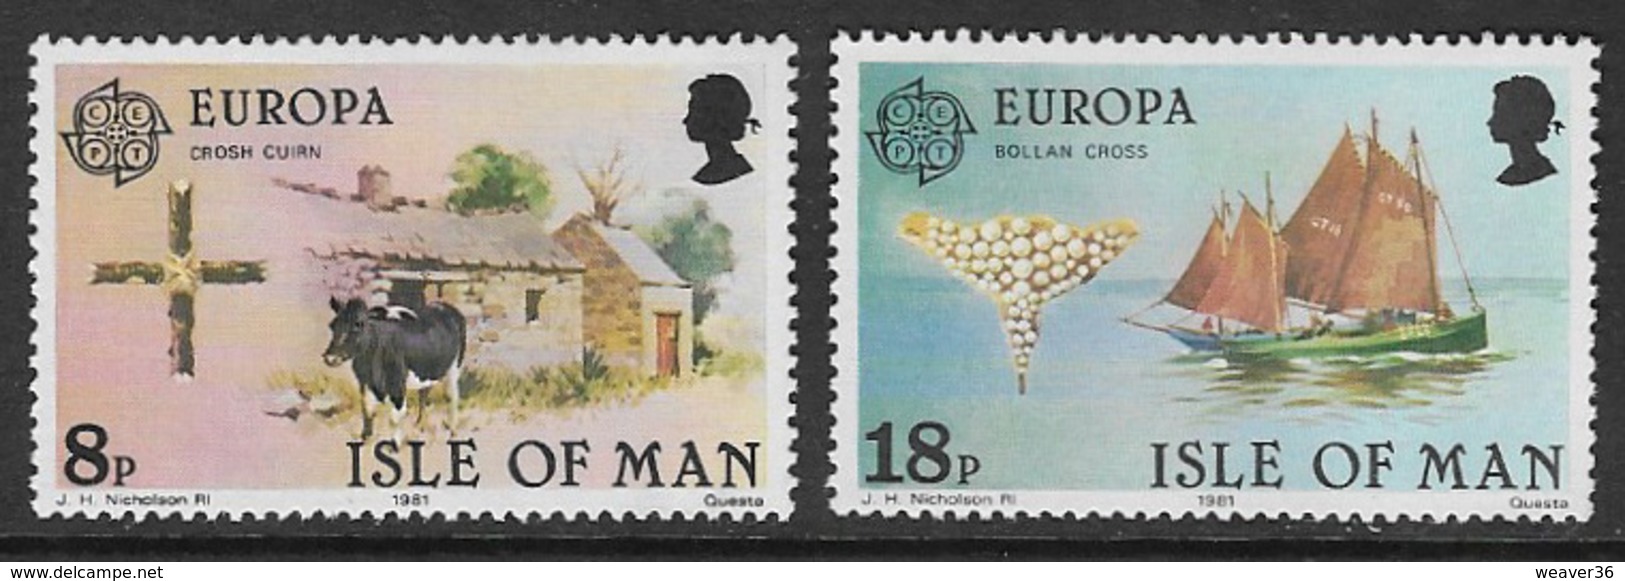 Isle Of Man SG195-196 1981 Europa Set 2v Complete Unmounted Mint [40/32412/25D] - Isle Of Man